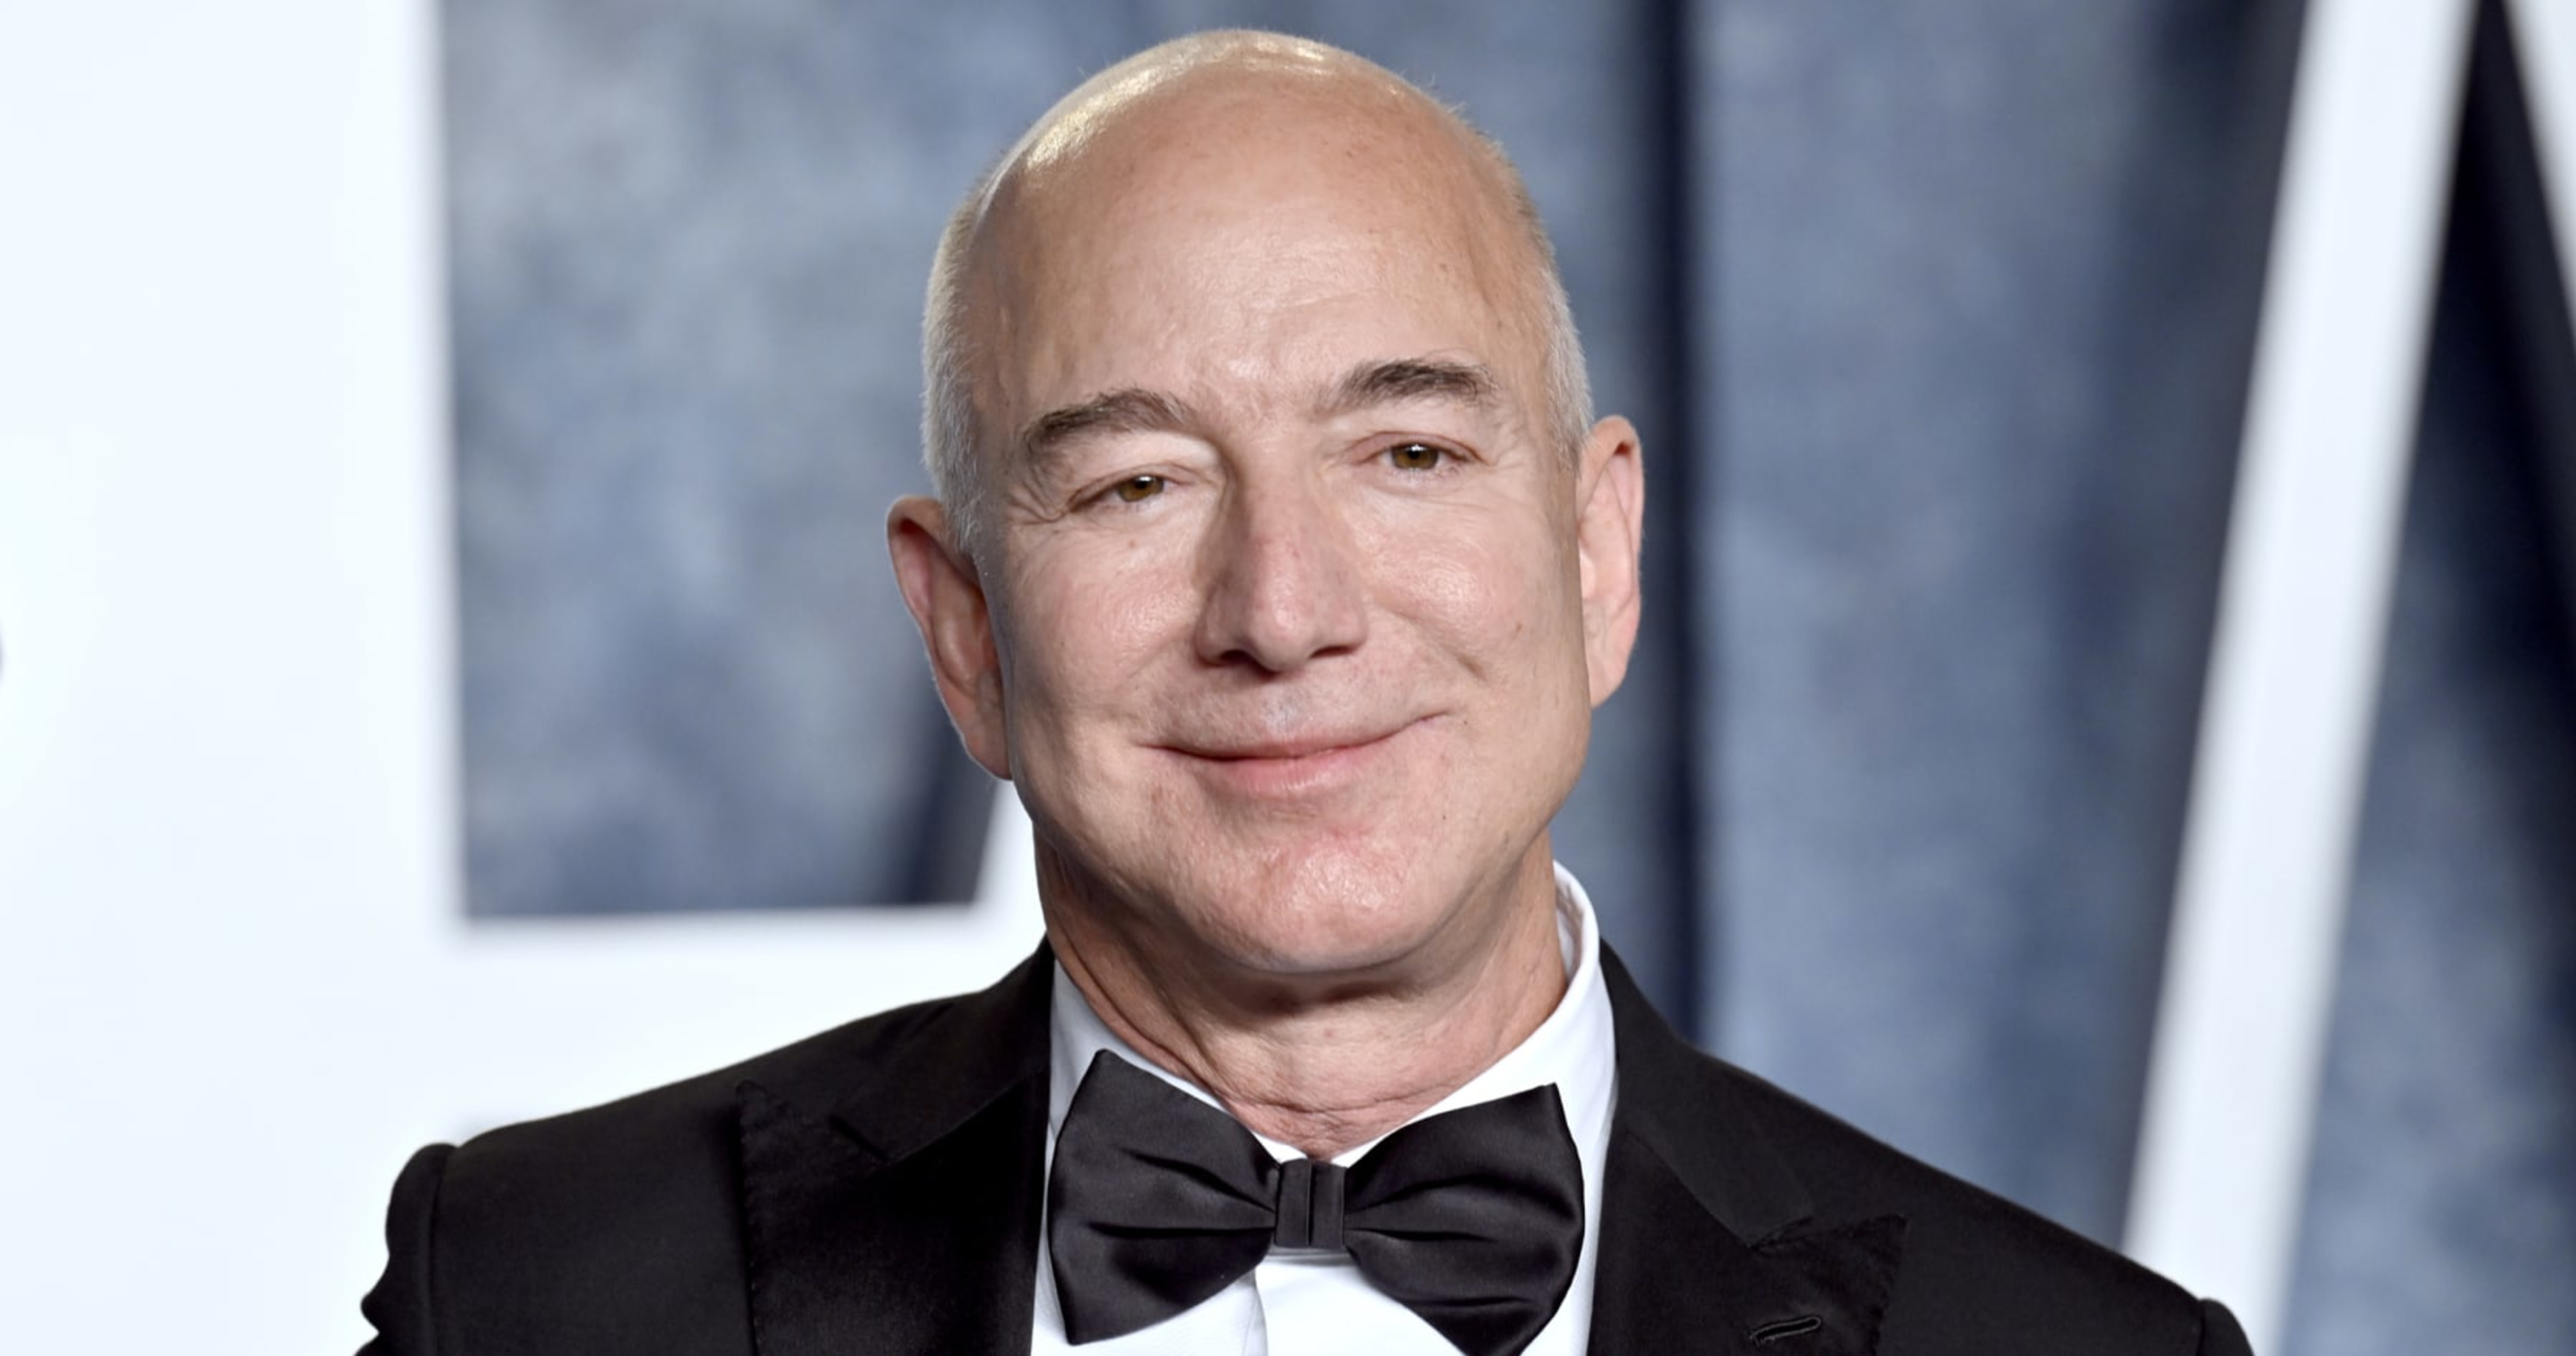 Report: Jeff Bezos 'Knows' Seattle Seahawks Are 'Sitting There